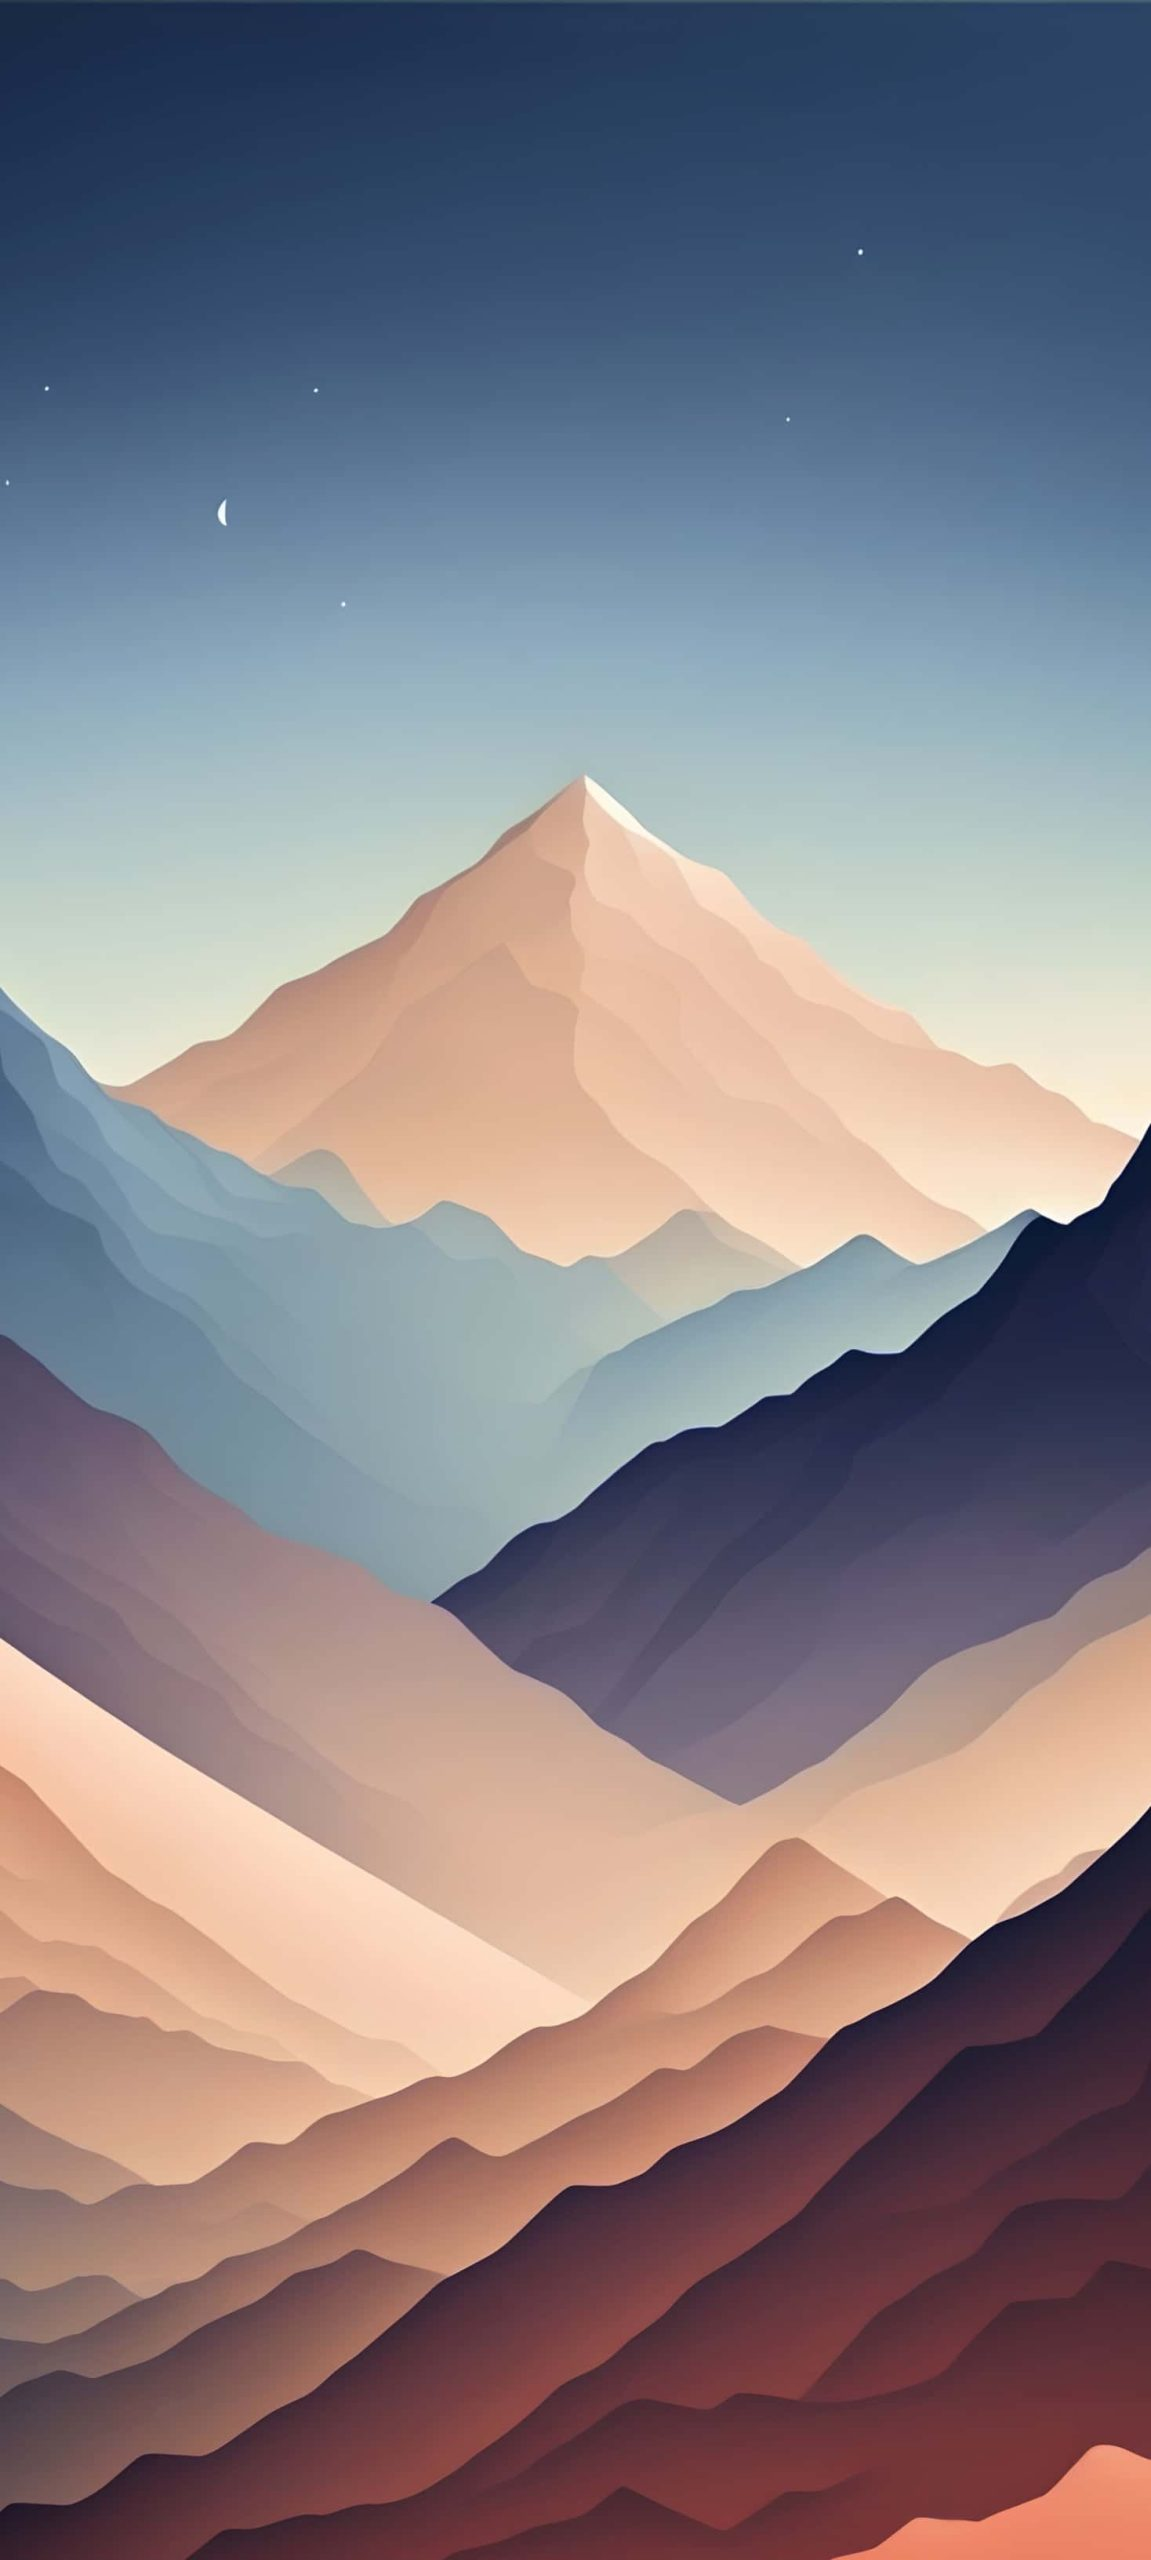 Mountains Minimal IPhone Wallpaper HD Scaled  IPhone Wallpapers